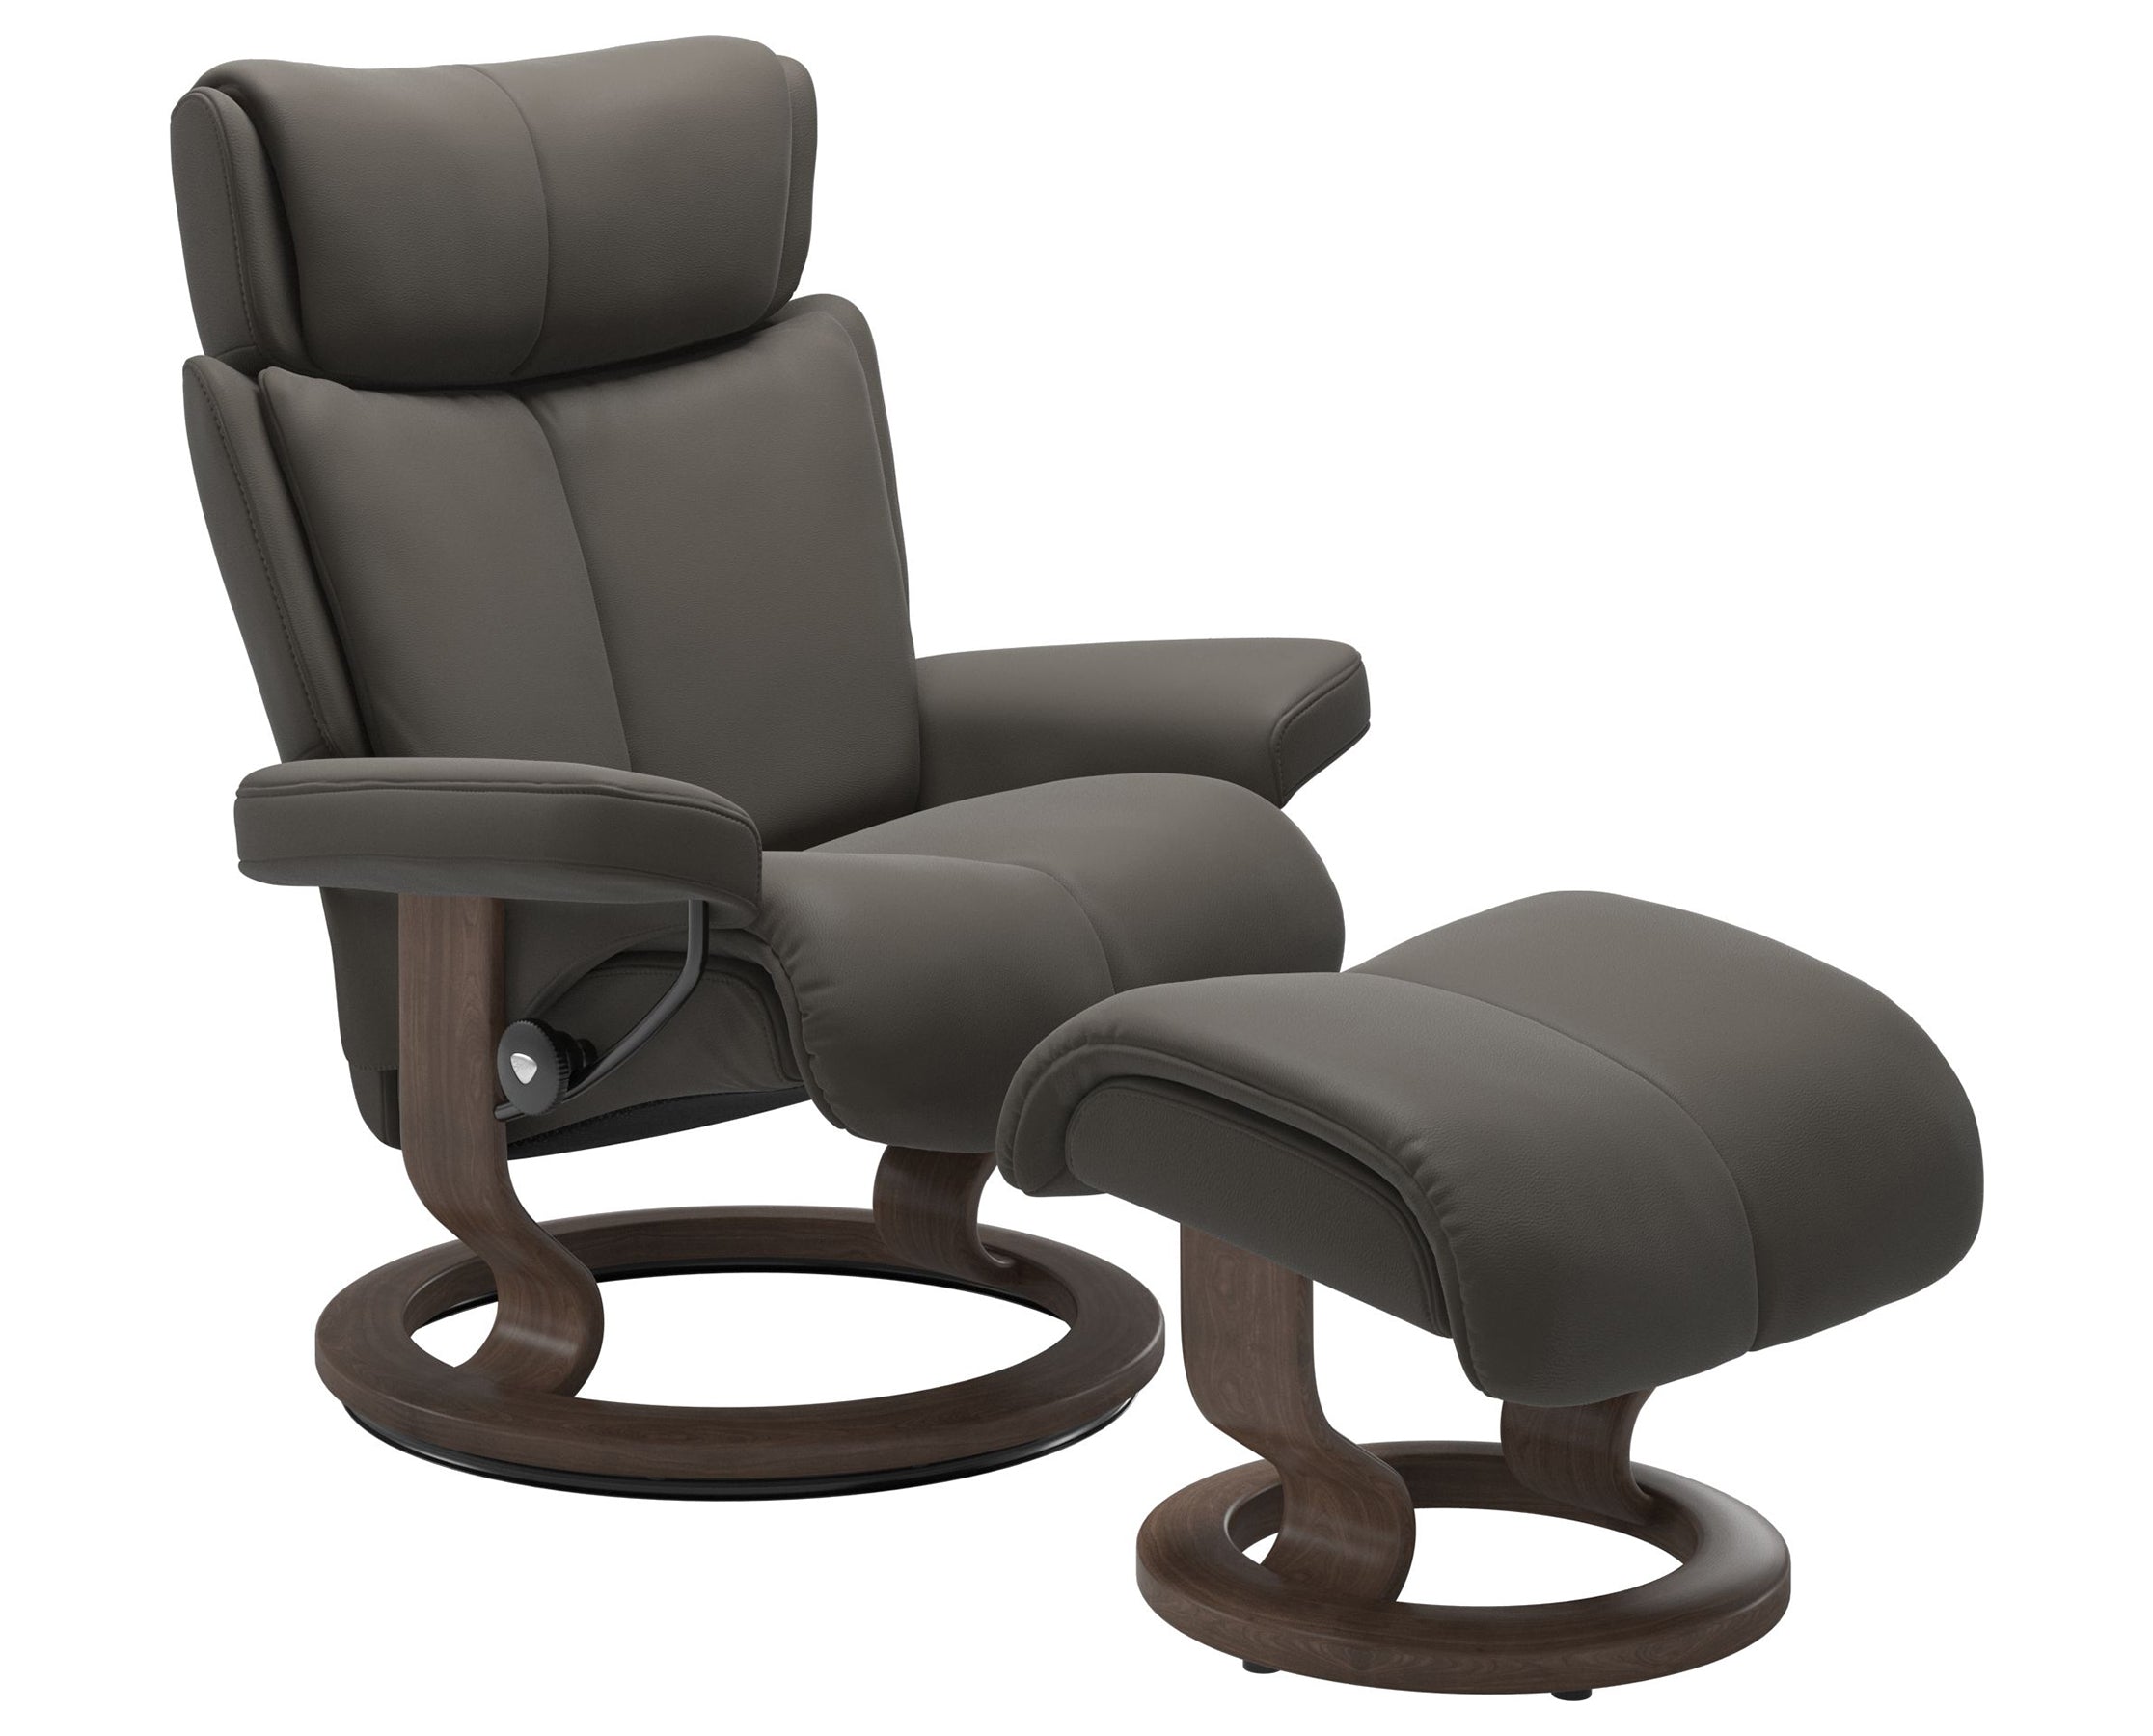 Paloma Leather Metal Grey S/M/L and Walnut Base | Stressless Magic Classic Recliner | Valley Ridge Furniture